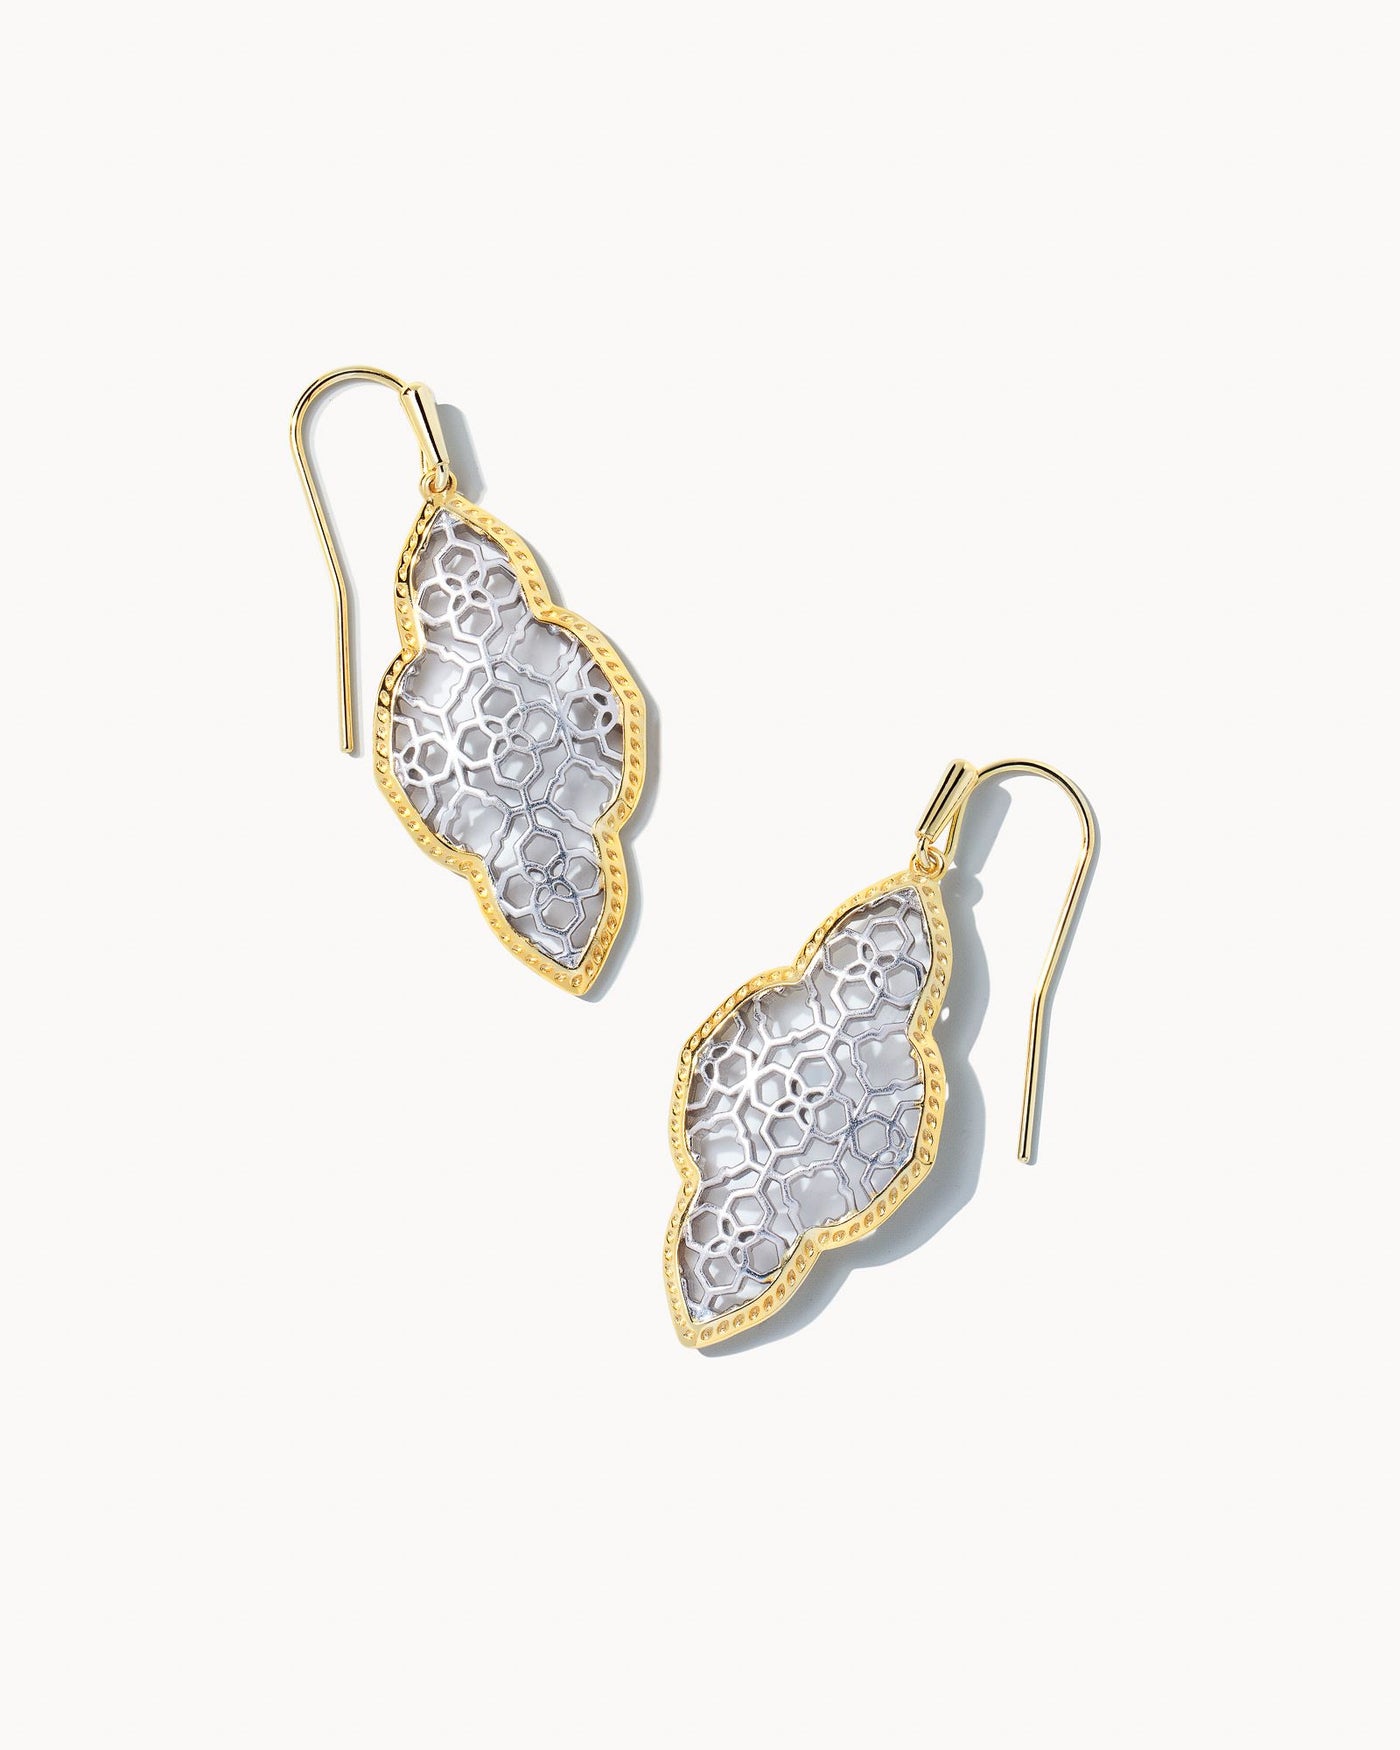 Kendra Scott Abbie Drop Earrings Gold - Silver Mix-Earrings-Kendra Scott-Market Street Nest, Fashionable Clothing, Shoes and Home Décor Located in Mabank, TX